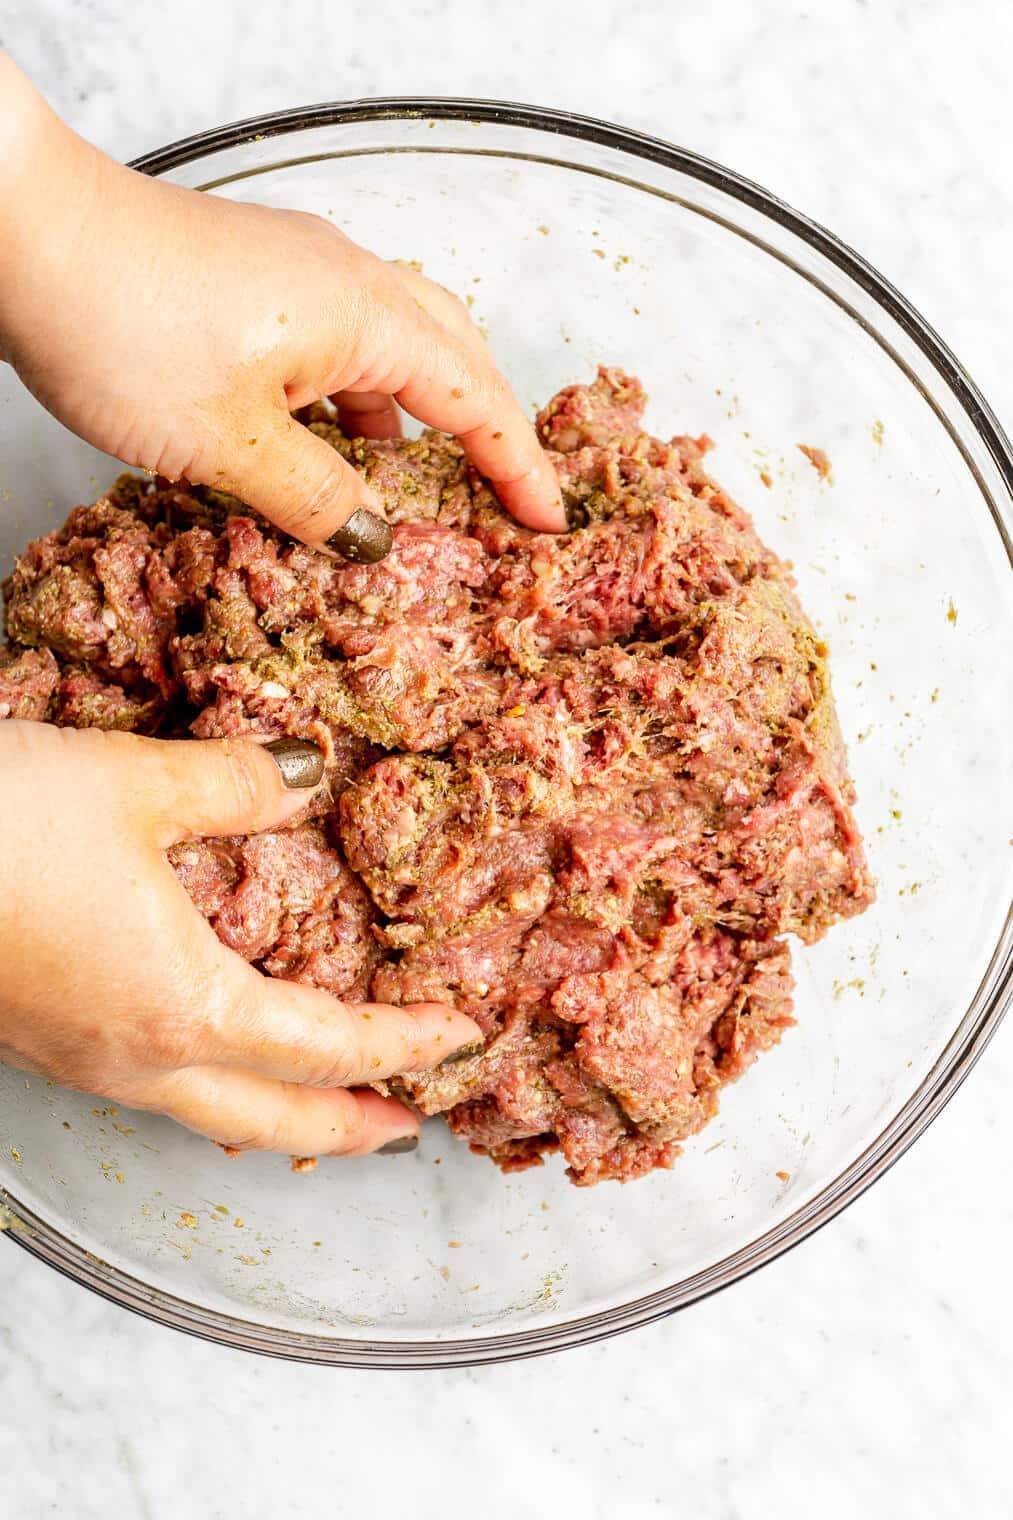 Hands mixing ground beef mixture in a glass bowl.